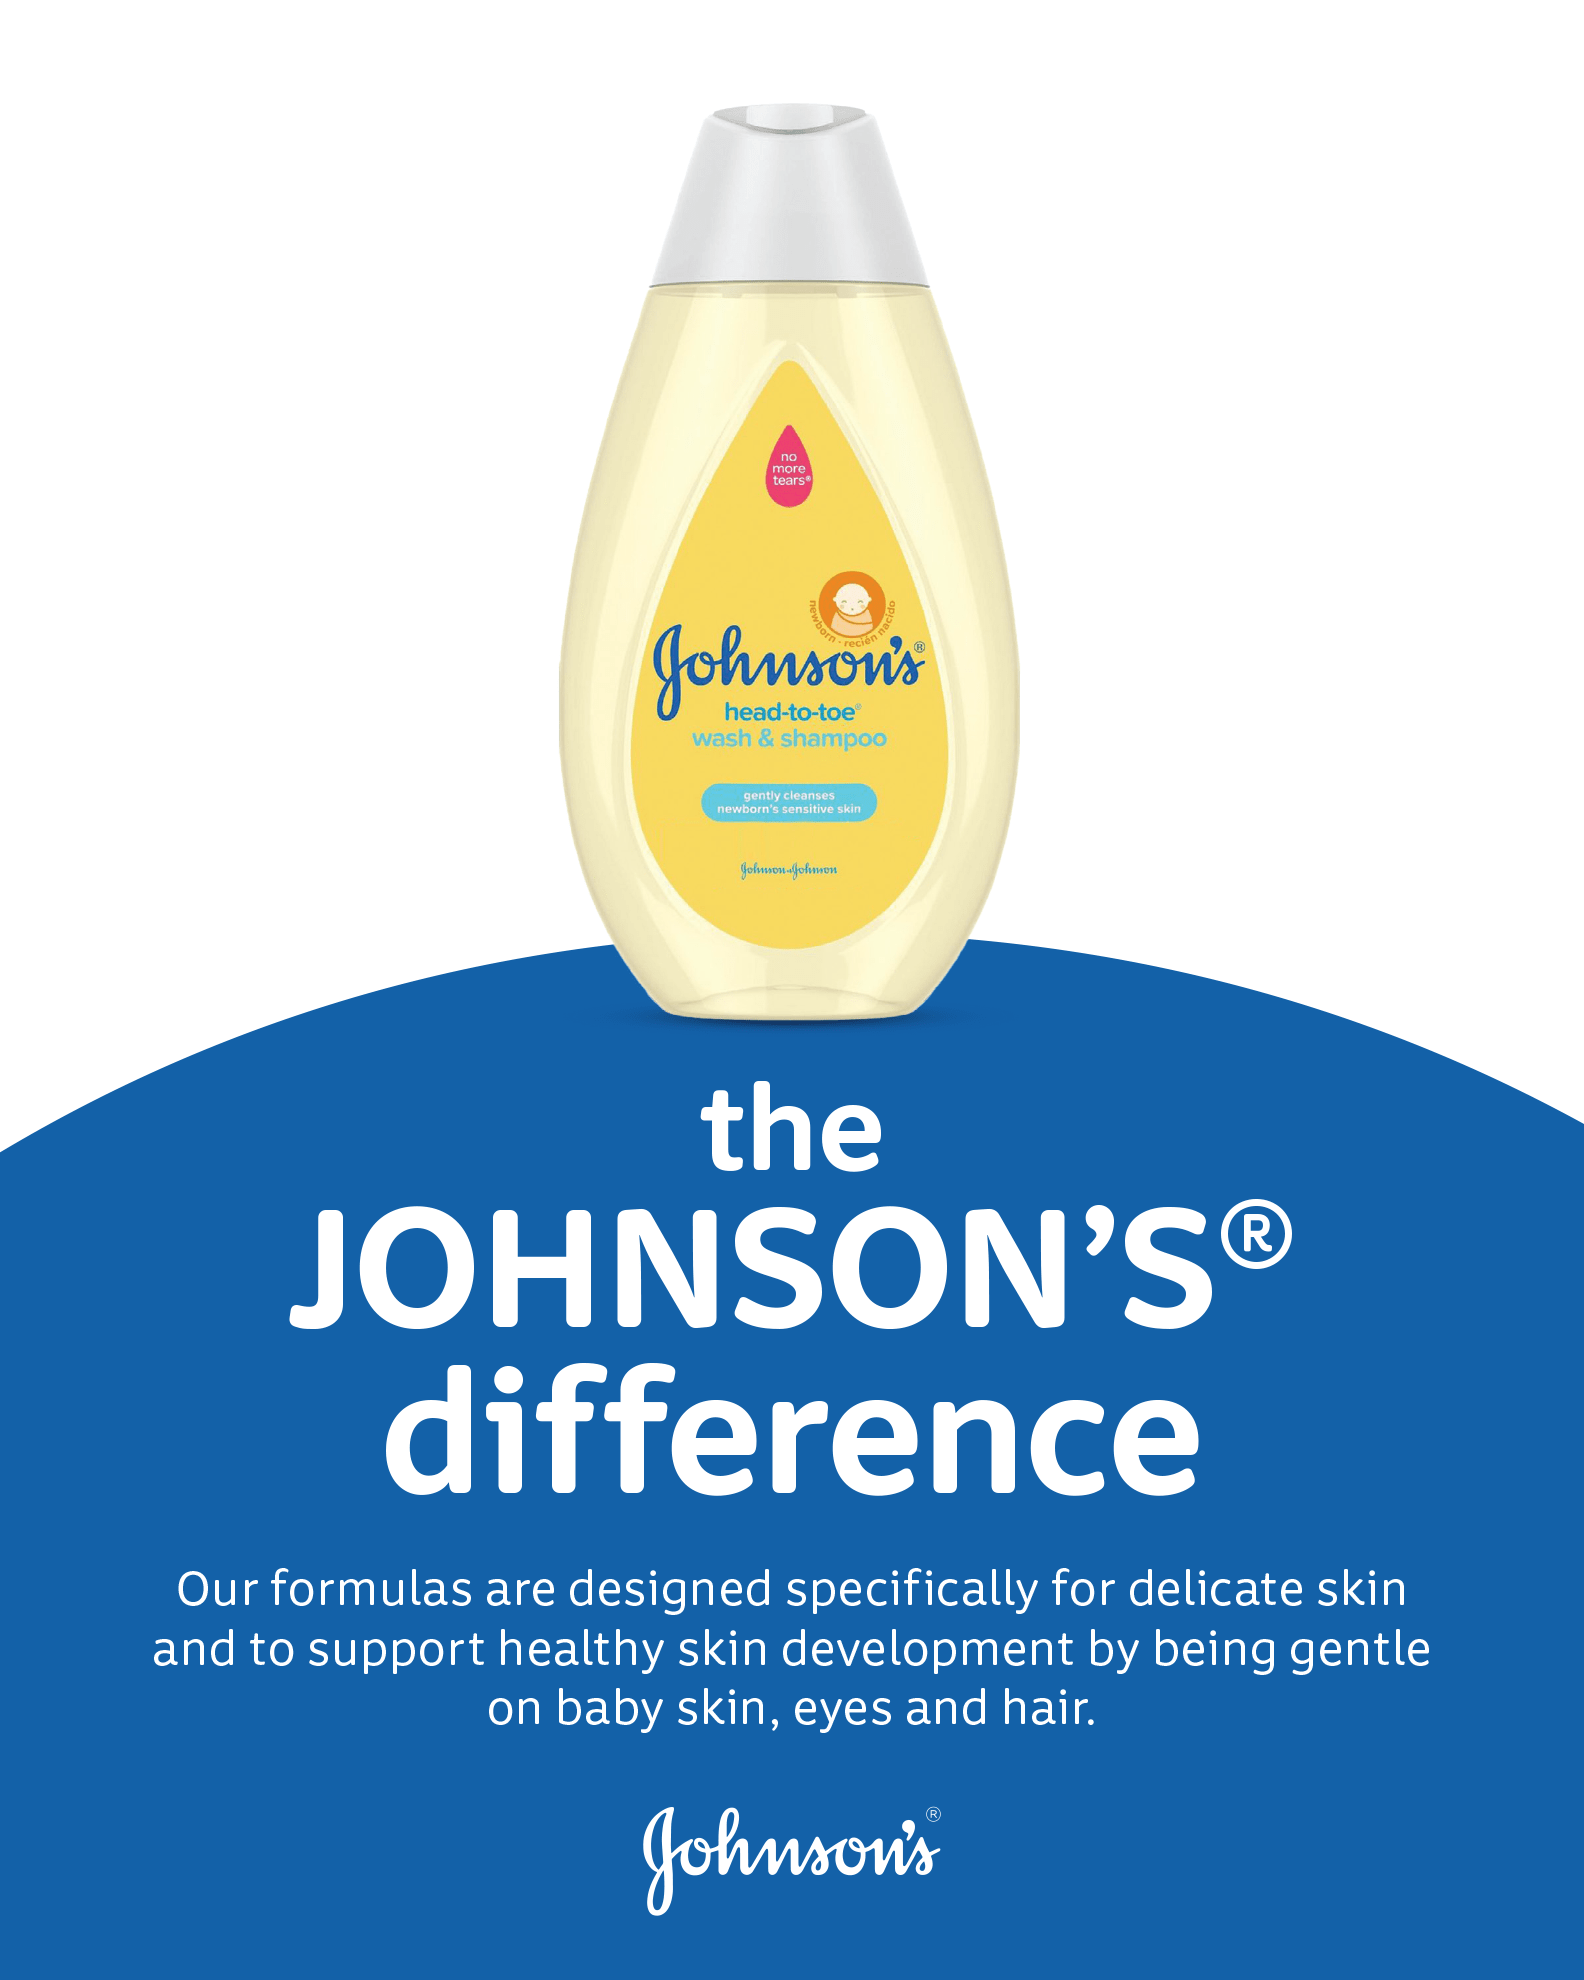 The Science Behind JOHNSON’S® Formulas